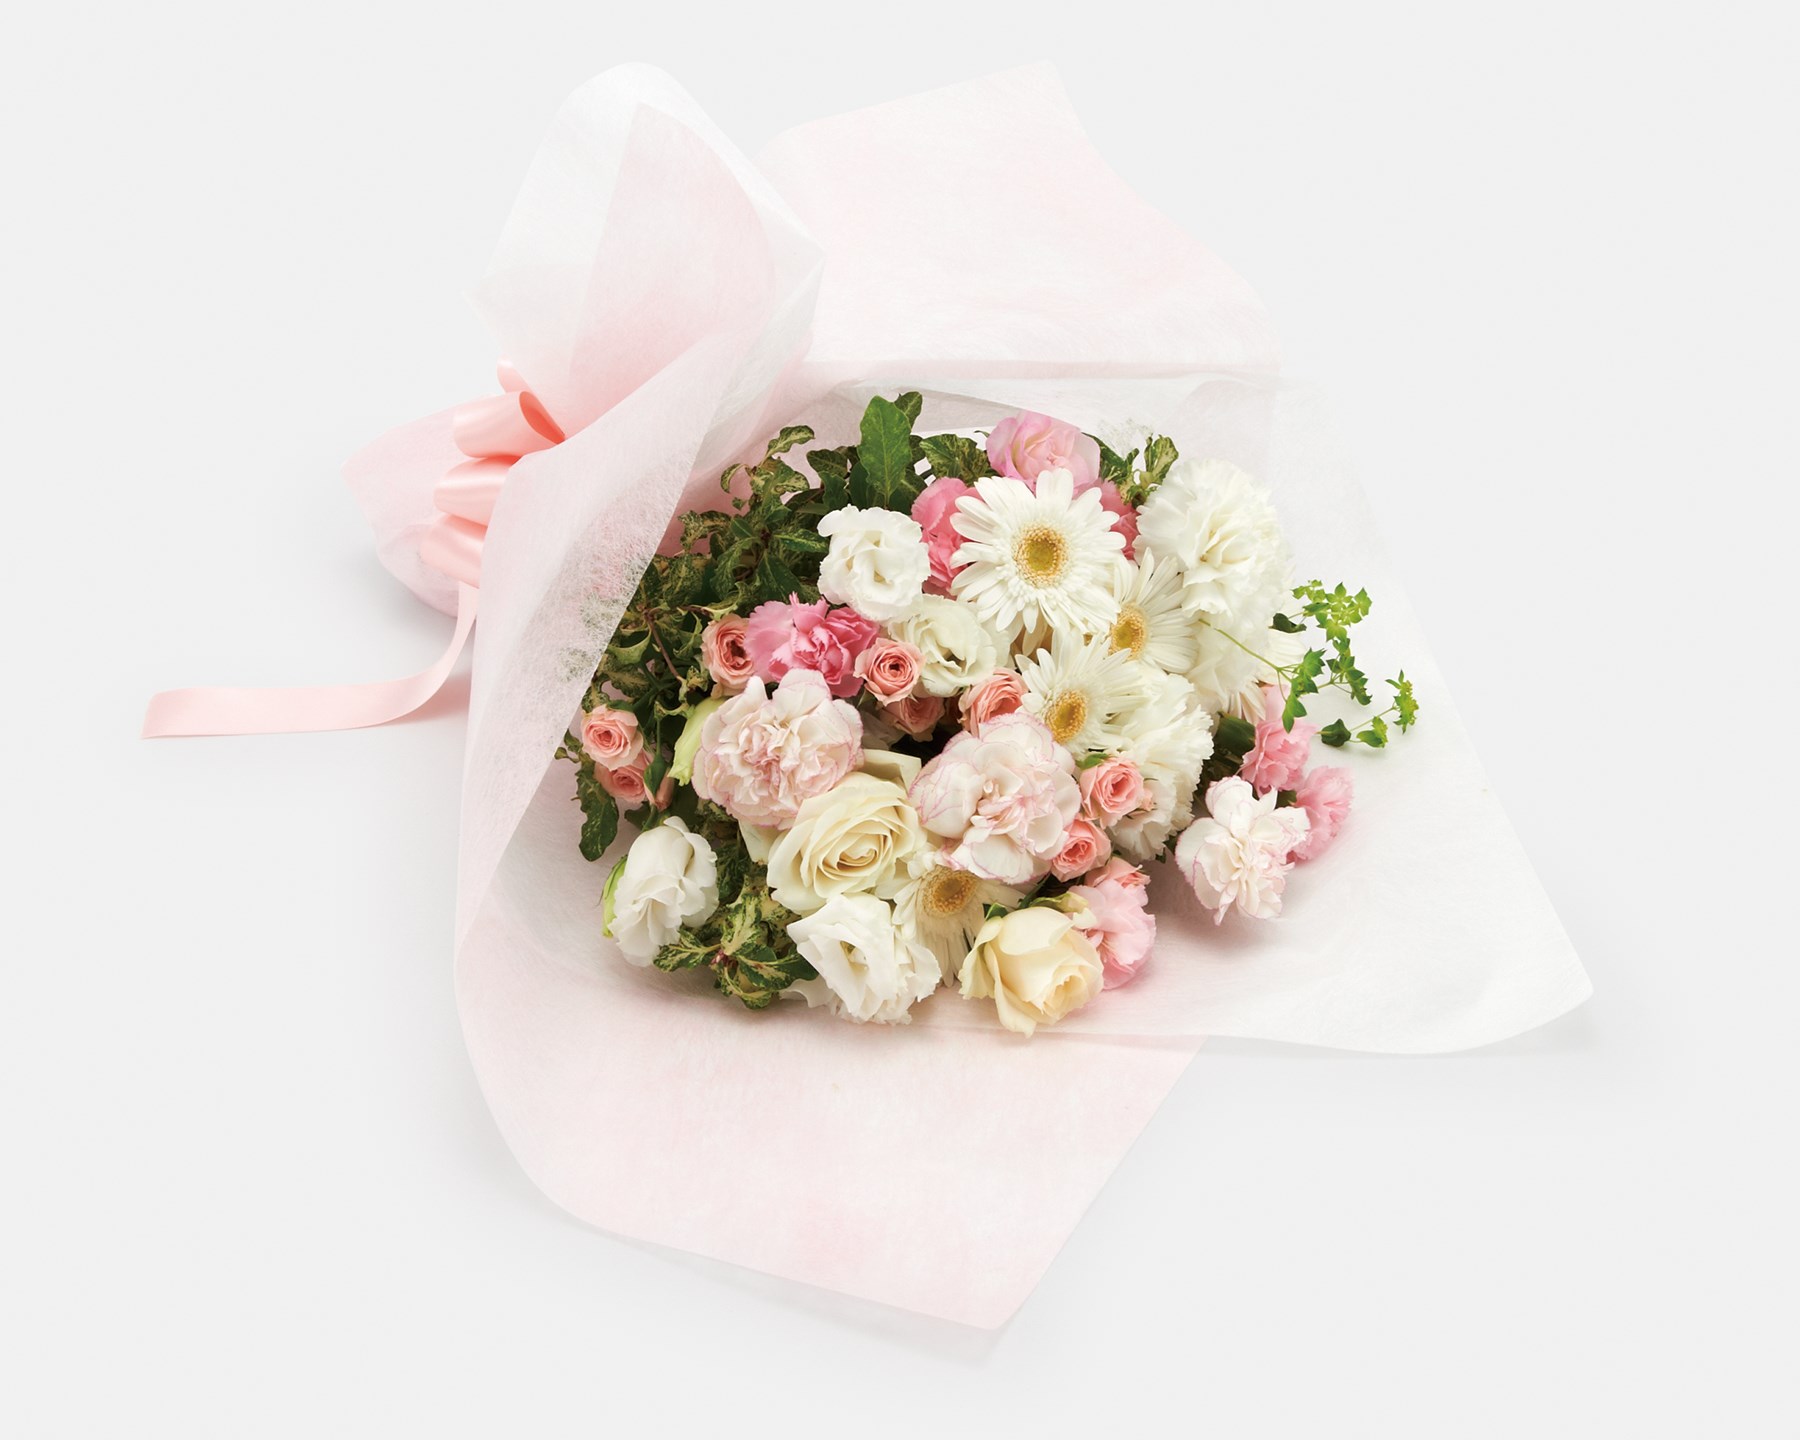 Mothers Day white and pink hand-tied bouquet